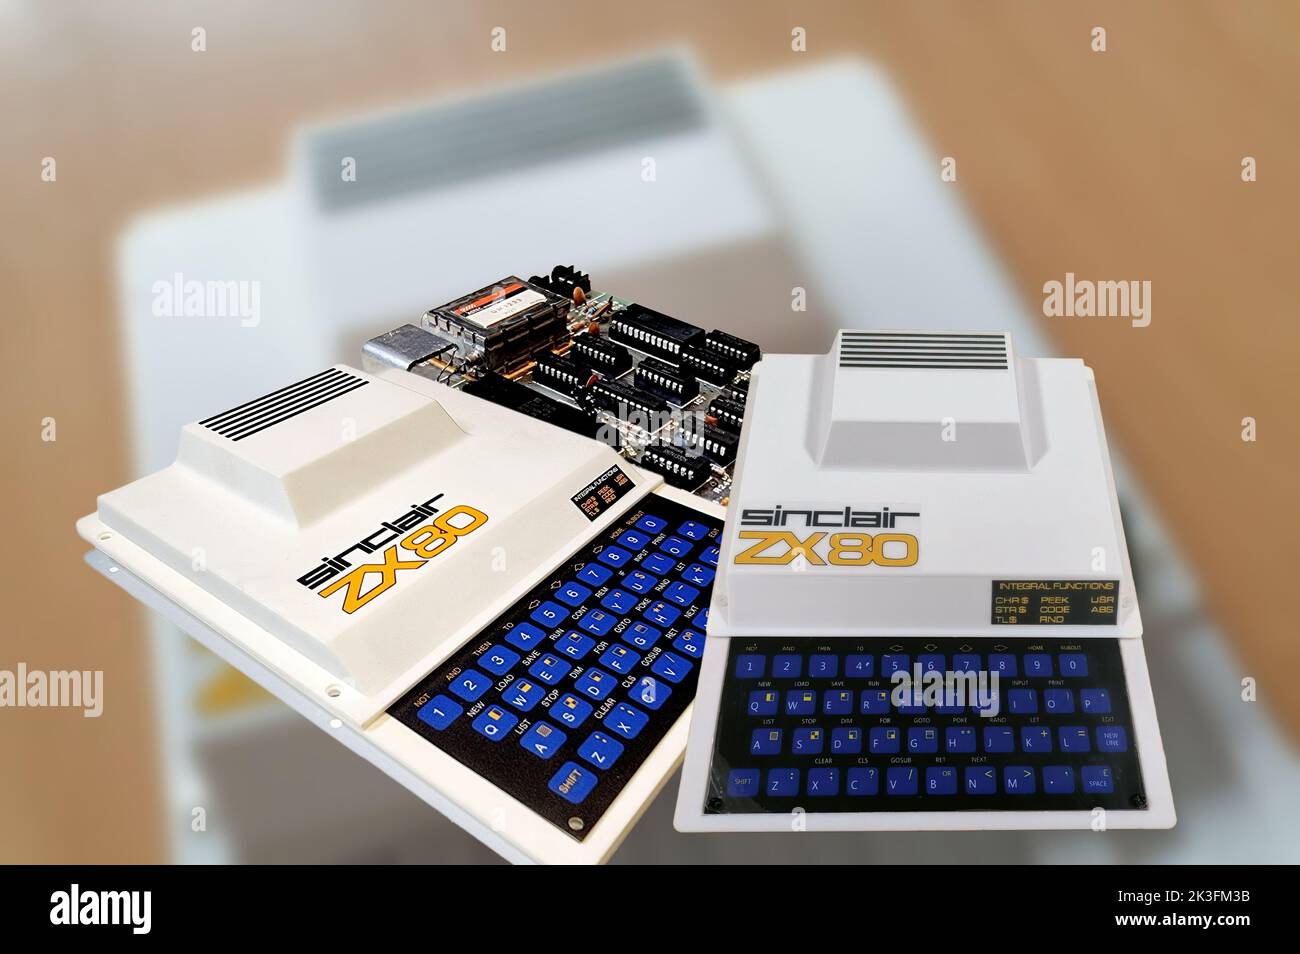 The Sinclair ZX80 is a home computer manufactured between 1979 and 1981 by Sinclair Research. Stock Photo